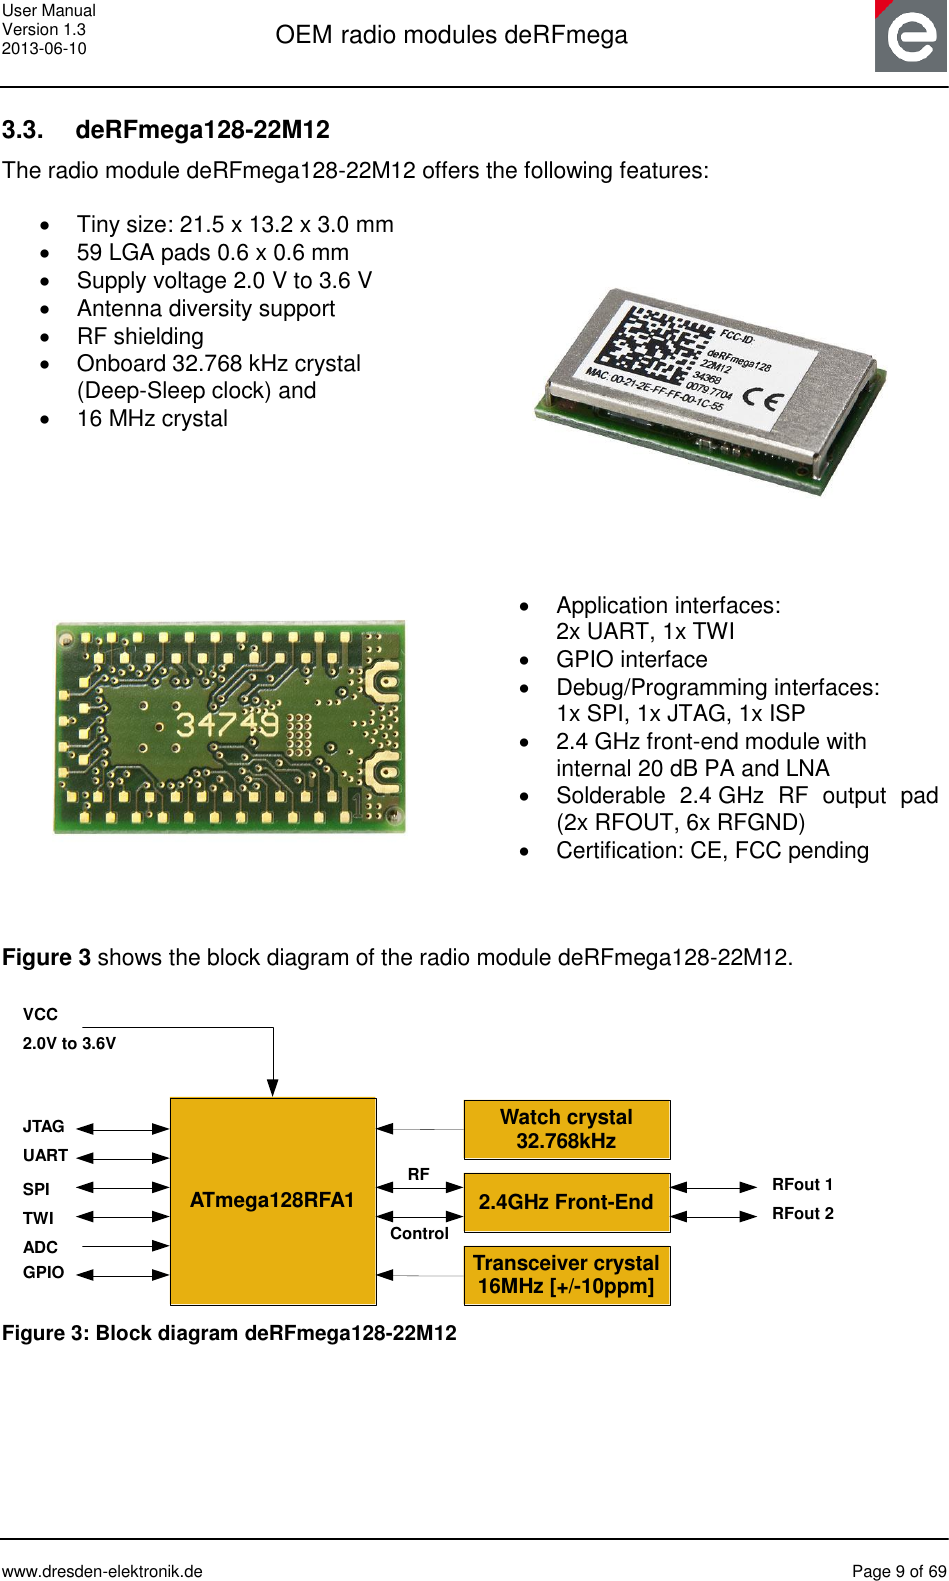 User Manual Version 1.3 2013-06-10  OEM radio modules deRFmega      www.dresden-elektronik.de  Page 9 of 69  3.3.  deRFmega128-22M12 The radio module deRFmega128-22M12 offers the following features:    Tiny size: 21.5 x 13.2 x 3.0 mm  59 LGA pads 0.6 x 0.6 mm   Supply voltage 2.0 V to 3.6 V   Antenna diversity support   RF shielding   Onboard 32.768 kHz crystal  (Deep-Sleep clock) and   16 MHz crystal      Application interfaces:  2x UART, 1x TWI   GPIO interface   Debug/Programming interfaces:  1x SPI, 1x JTAG, 1x ISP   2.4 GHz front-end module with  internal 20 dB PA and LNA   Solderable  2.4 GHz  RF  output  pad (2x RFOUT, 6x RFGND)  Certification: CE, FCC pending   Figure 3 shows the block diagram of the radio module deRFmega128-22M12.     Figure 3: Block diagram deRFmega128-22M12  ATmega128RFA1Transceiver crystal16MHz [+/-10ppm]JTAGUARTVCC2.0V to 3.6VWatch crystal32.768kHzSPITWIADCGPIO2.4GHz Front-End RFout 1RFout 2RFControl